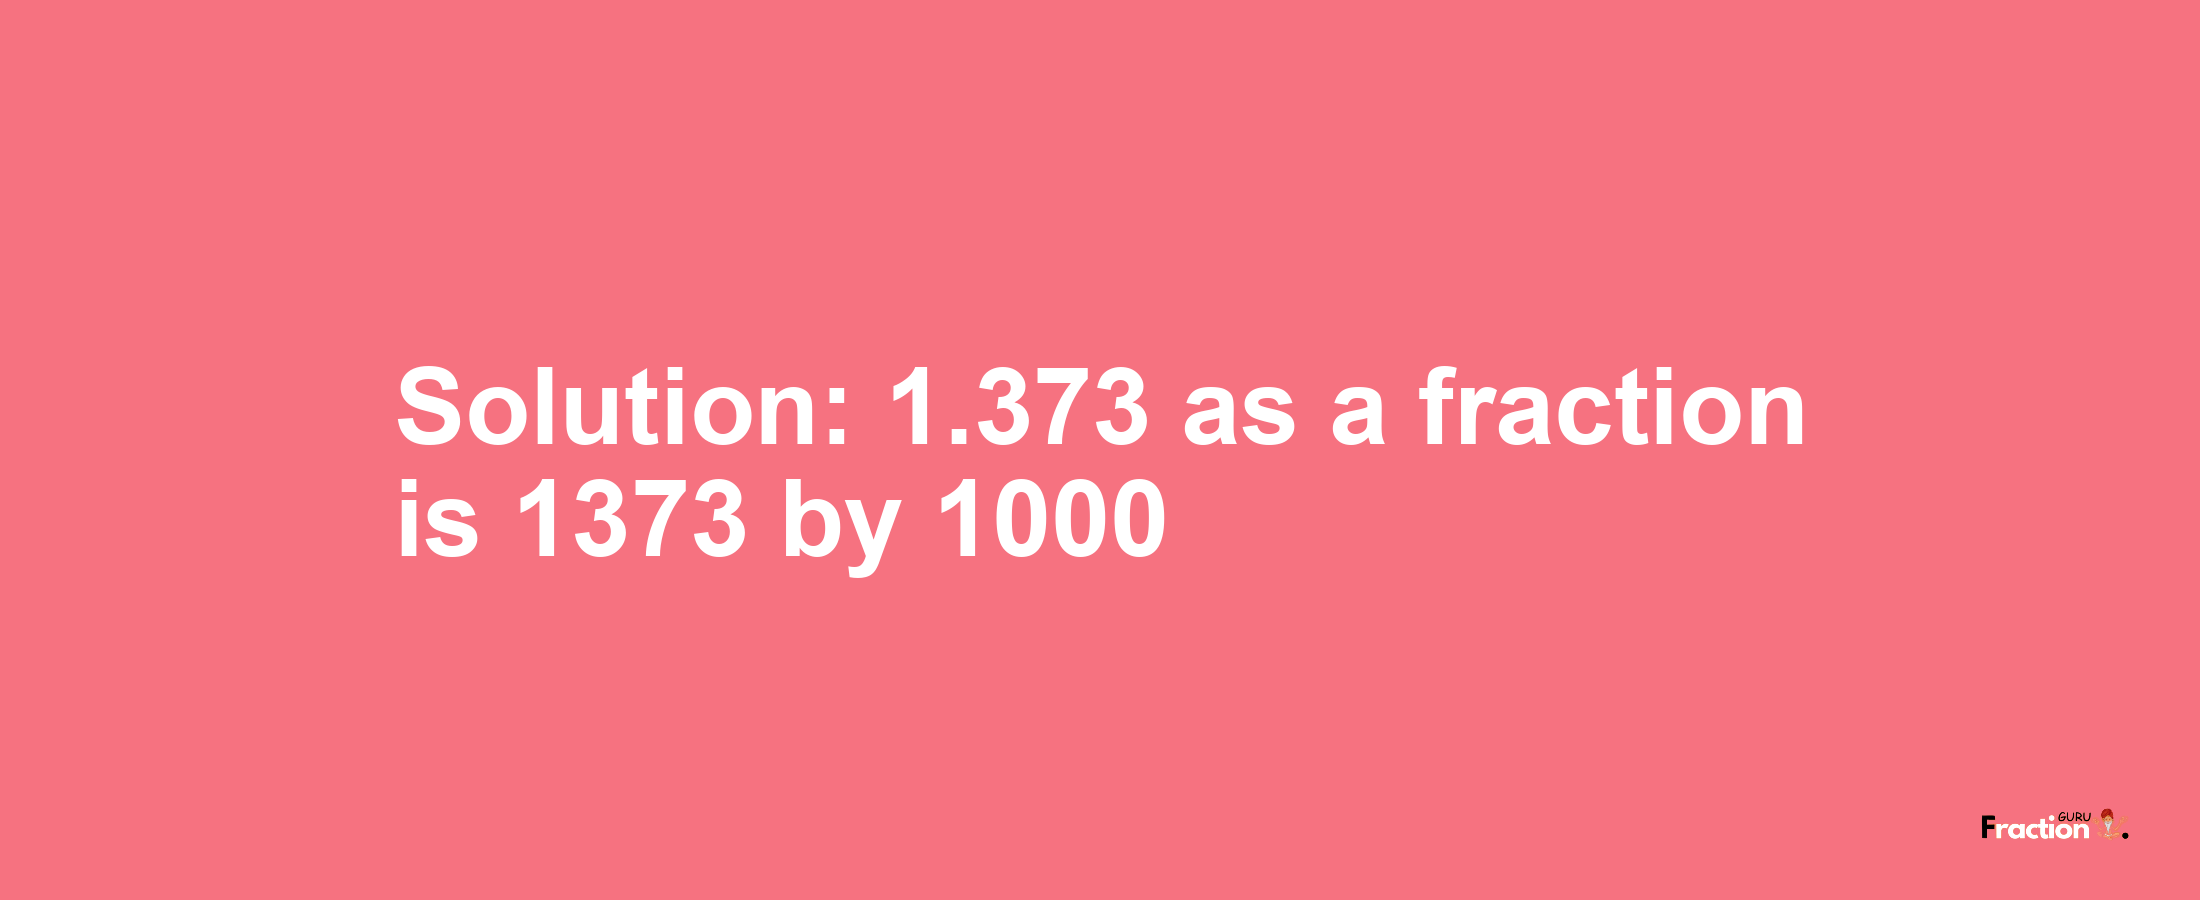 Solution:1.373 as a fraction is 1373/1000